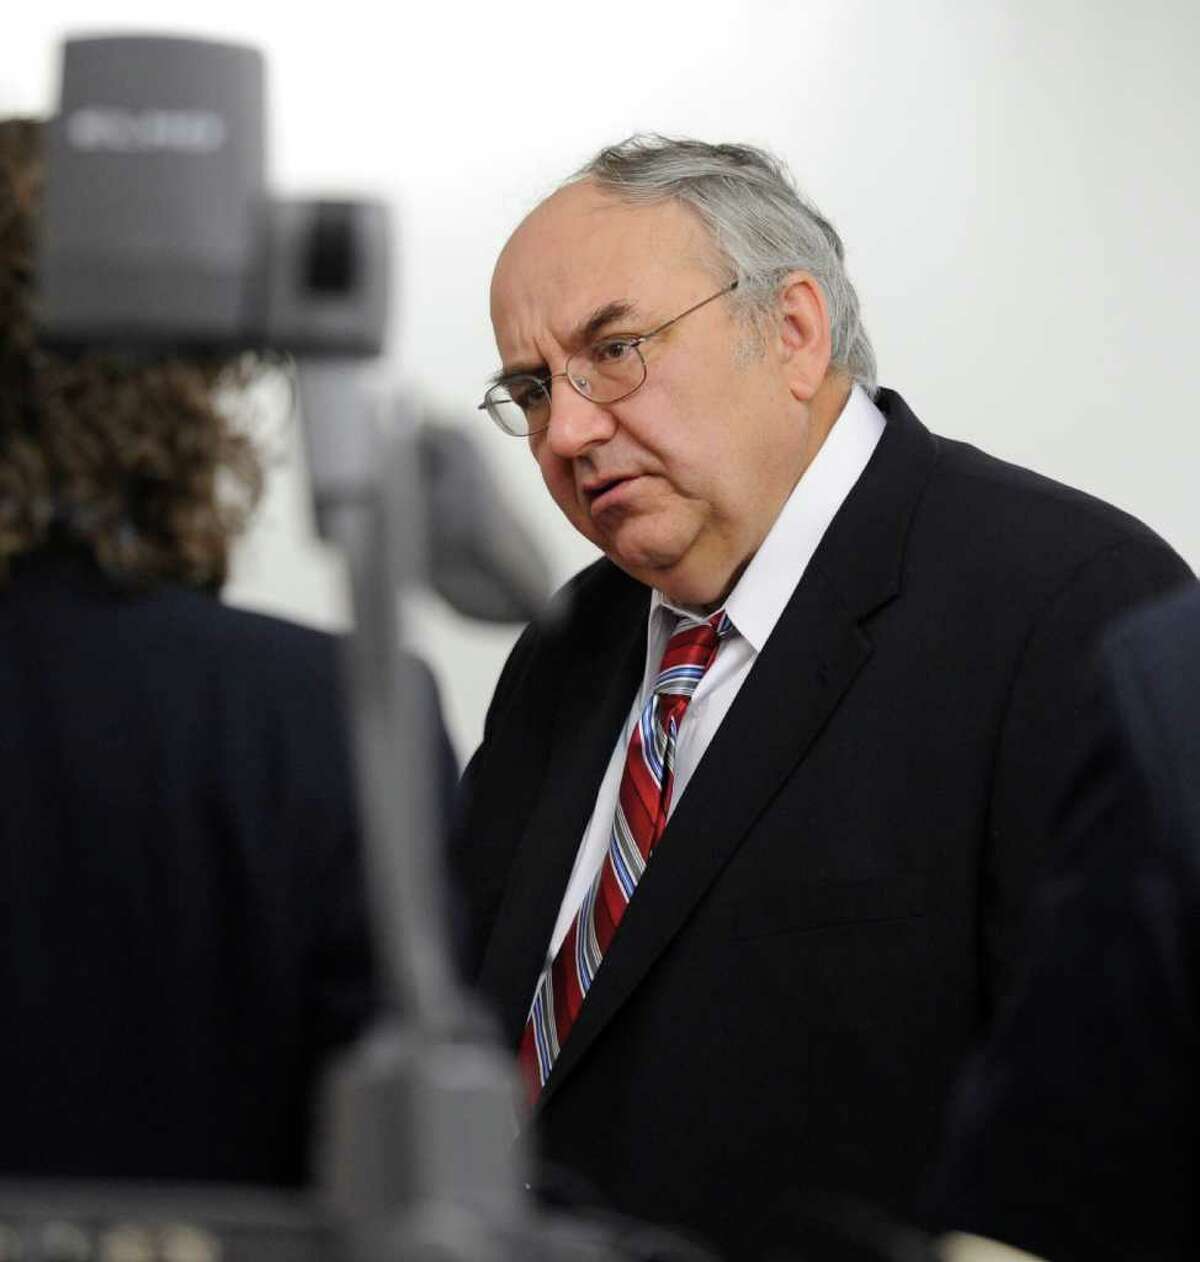 Dr. Michael Sikirica, Rensselaer County chief medical examiner, appears in Washington County Court in Fort Edward, N.Y., March 1, 2012, to testify in the Matthew Slocum murder trial. Because Sikirica is not vaccinated against coronavirus, he will not be able to conduct autopsies at Albany Med for the county. (Skip Dickstein / Times Union)